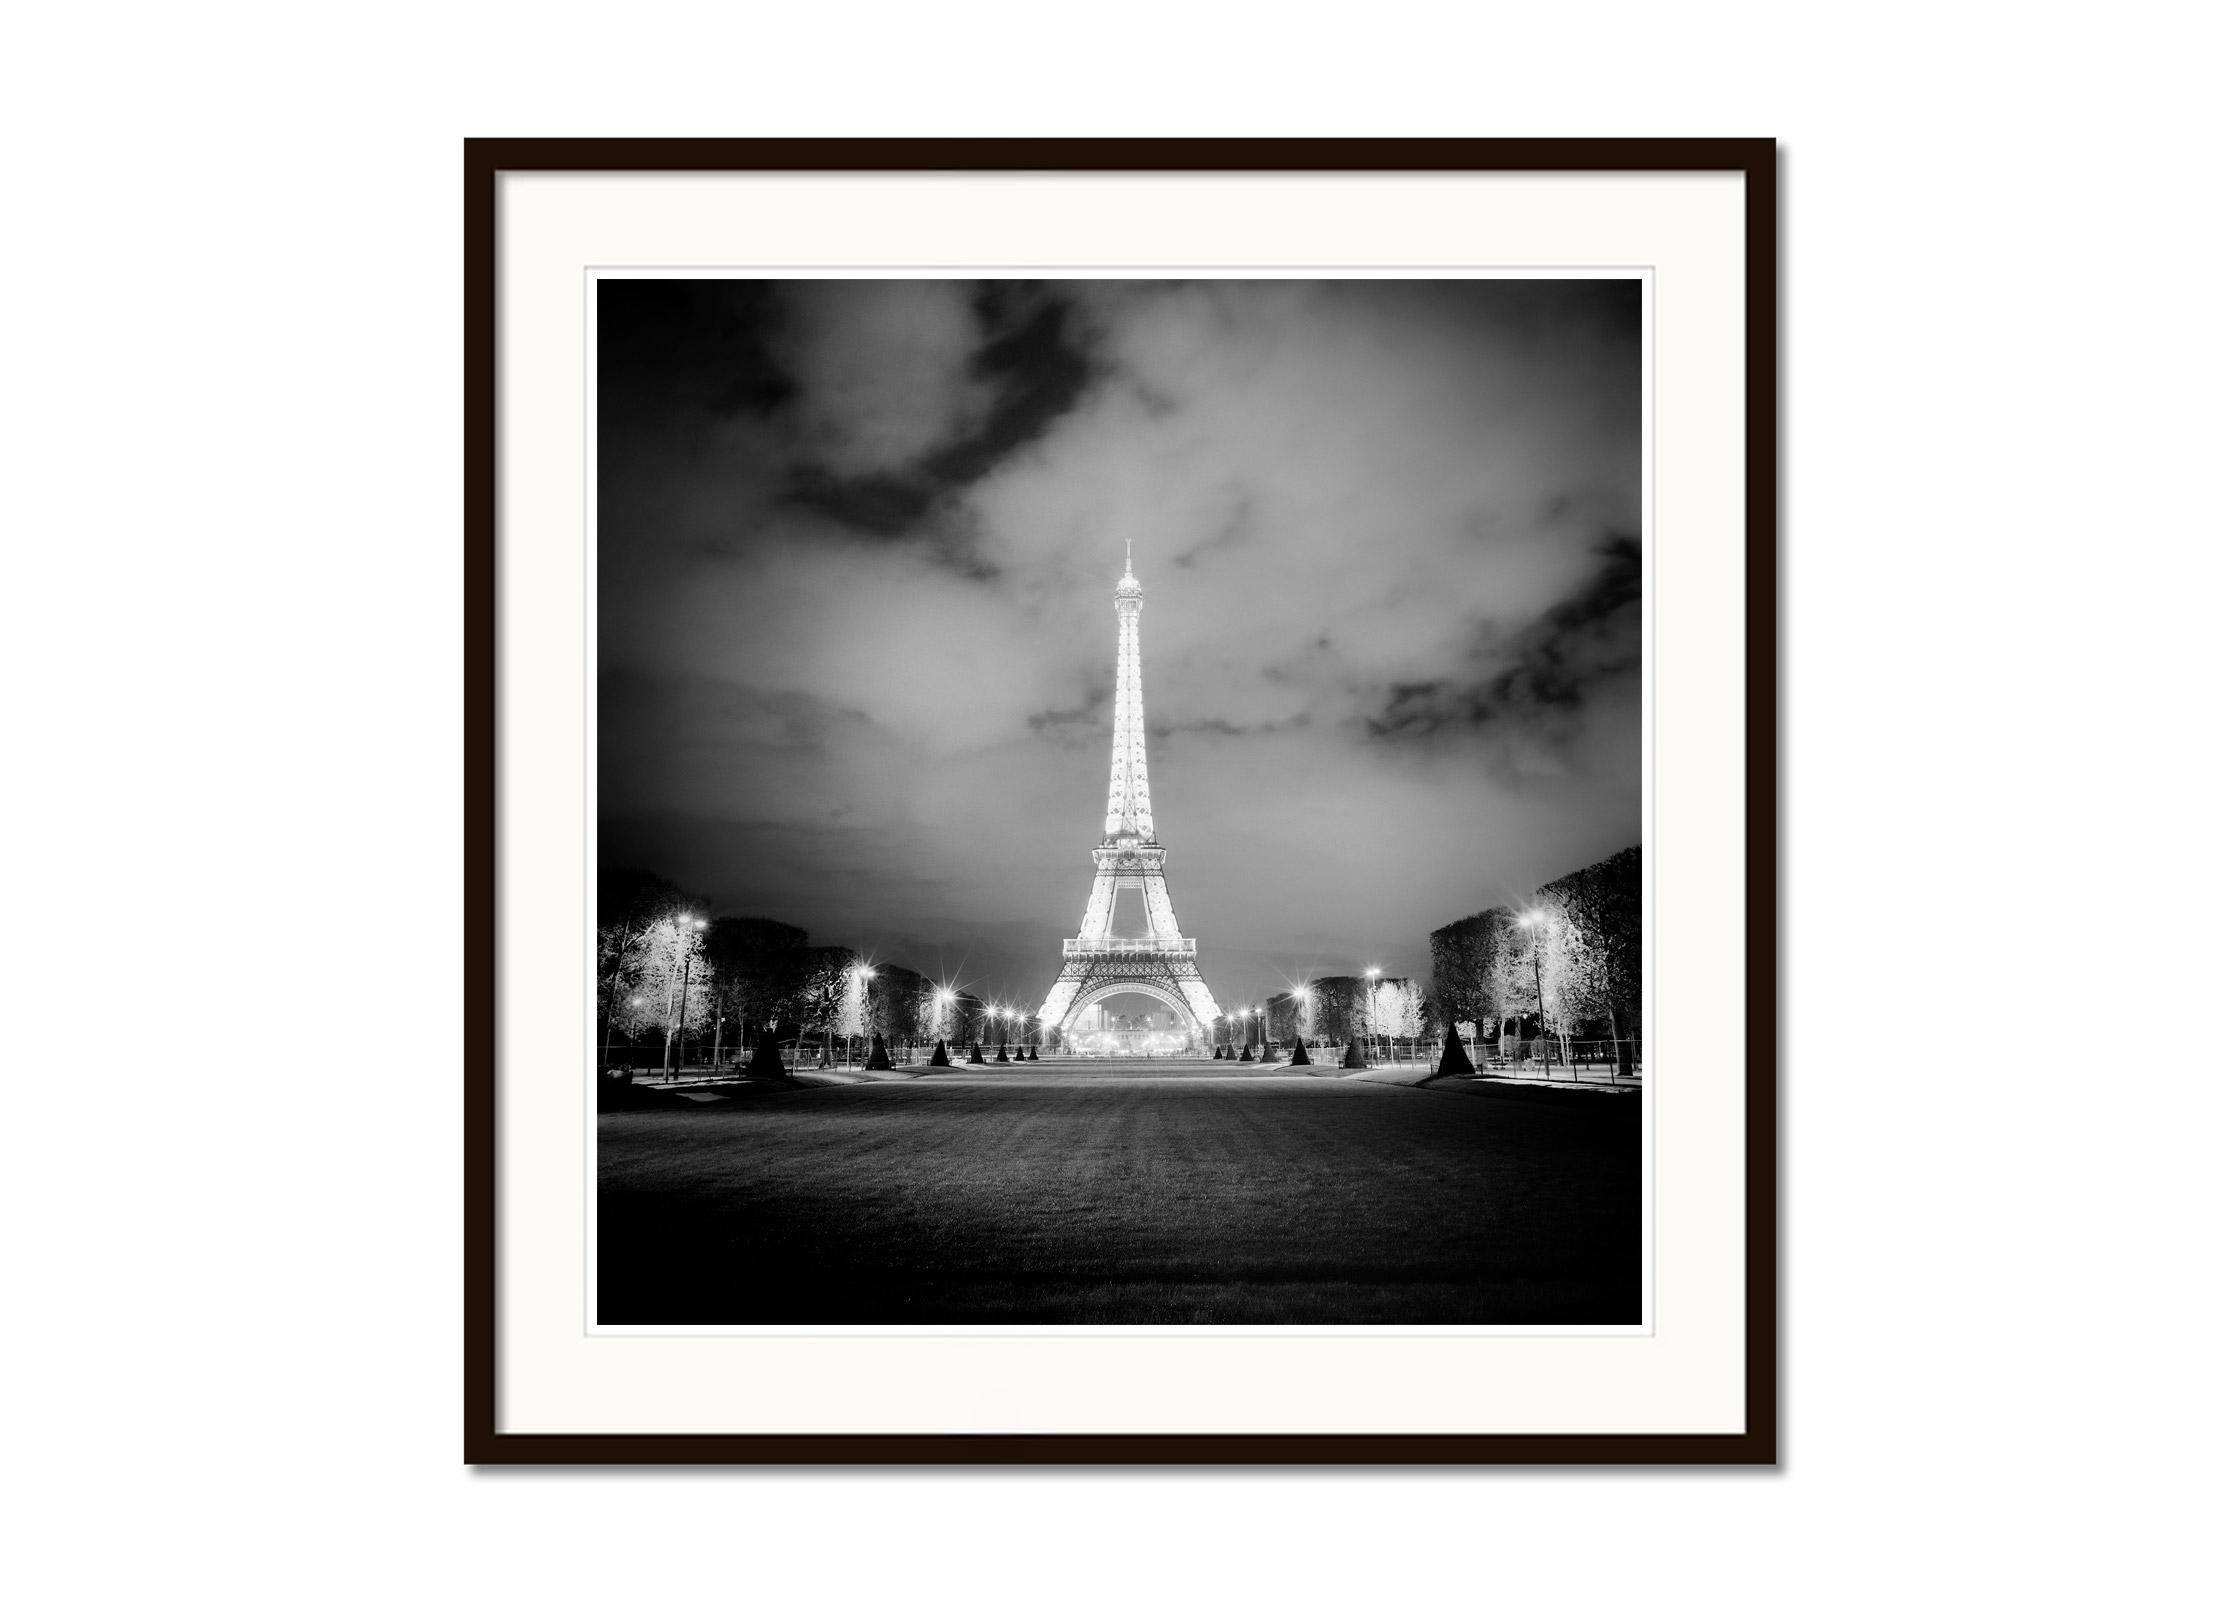 Eiffel Tower, Night, Paris, light show, black and white photography, cityscape - Black Landscape Photograph by Gerald Berghammer